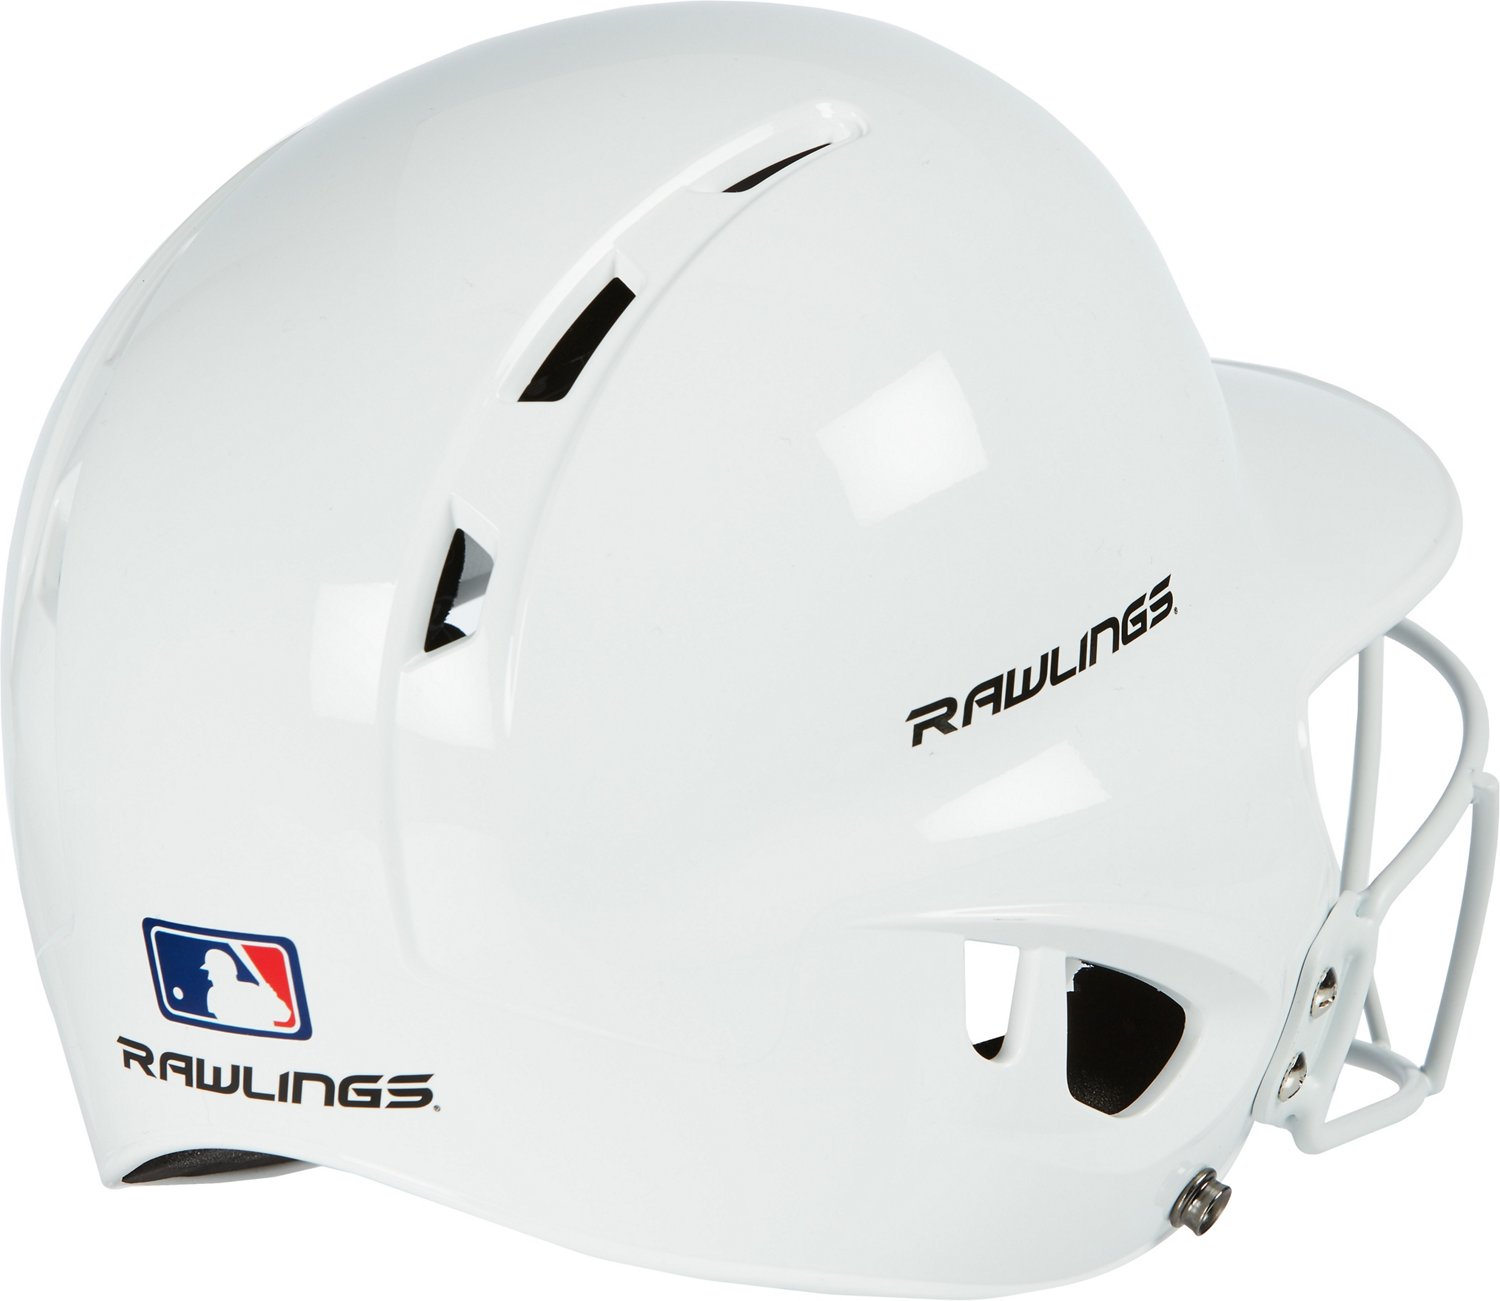 Rawlings Kids' MLB-Style T-ball Batting Helmet with Face Guard | Academy